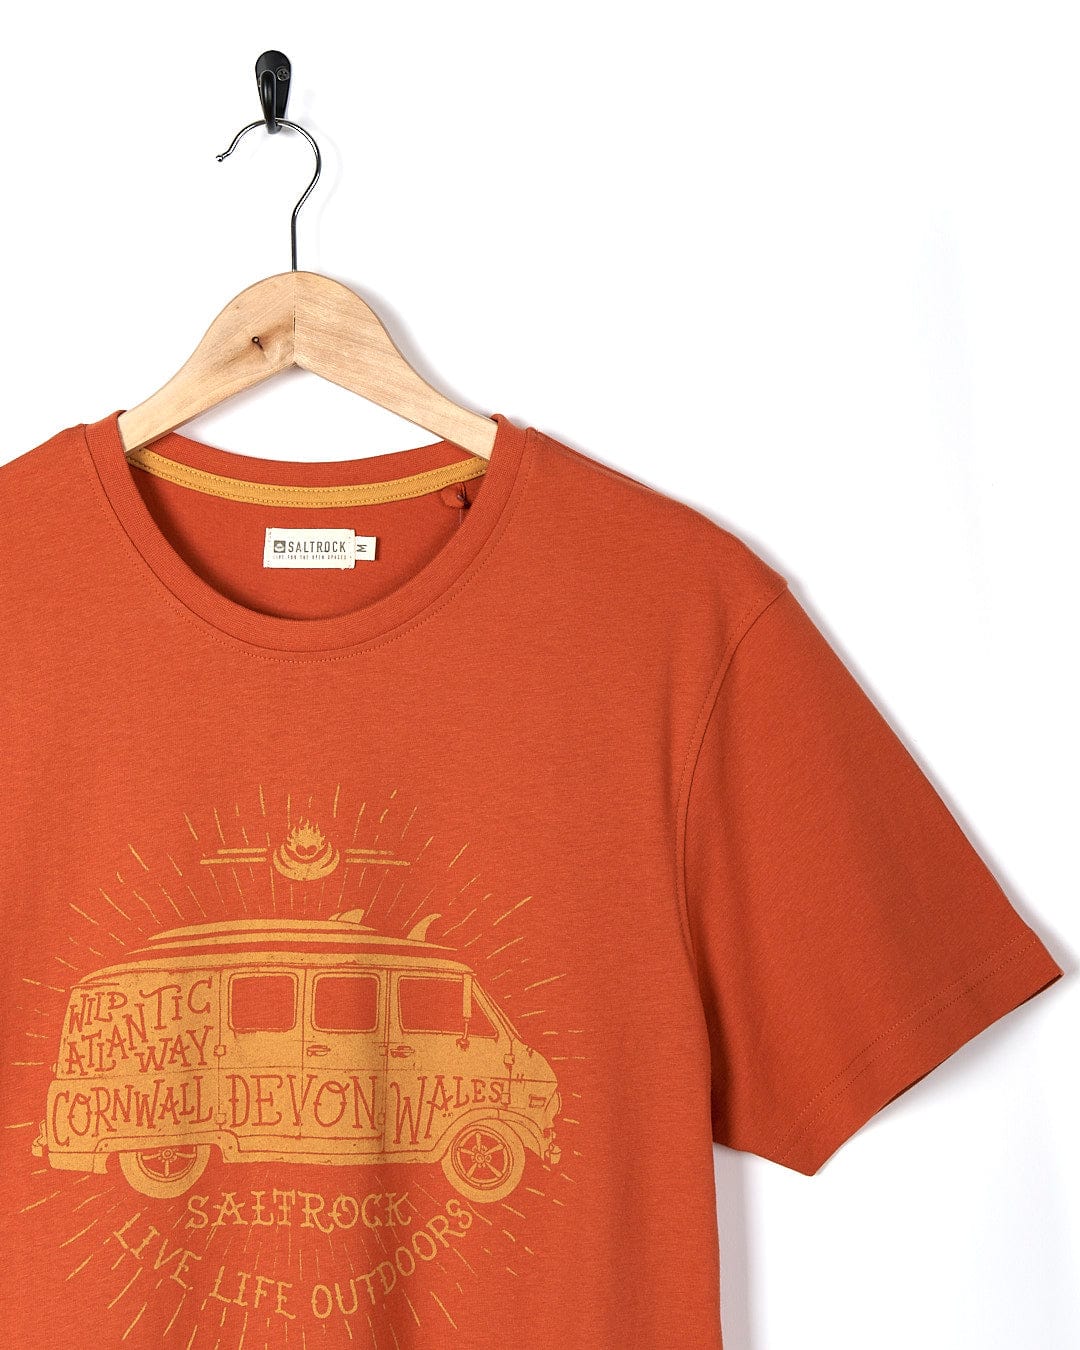 A Saltrock Live Life Location - Mens Short Sleeve T-Shirt - Orange with an image of a van.